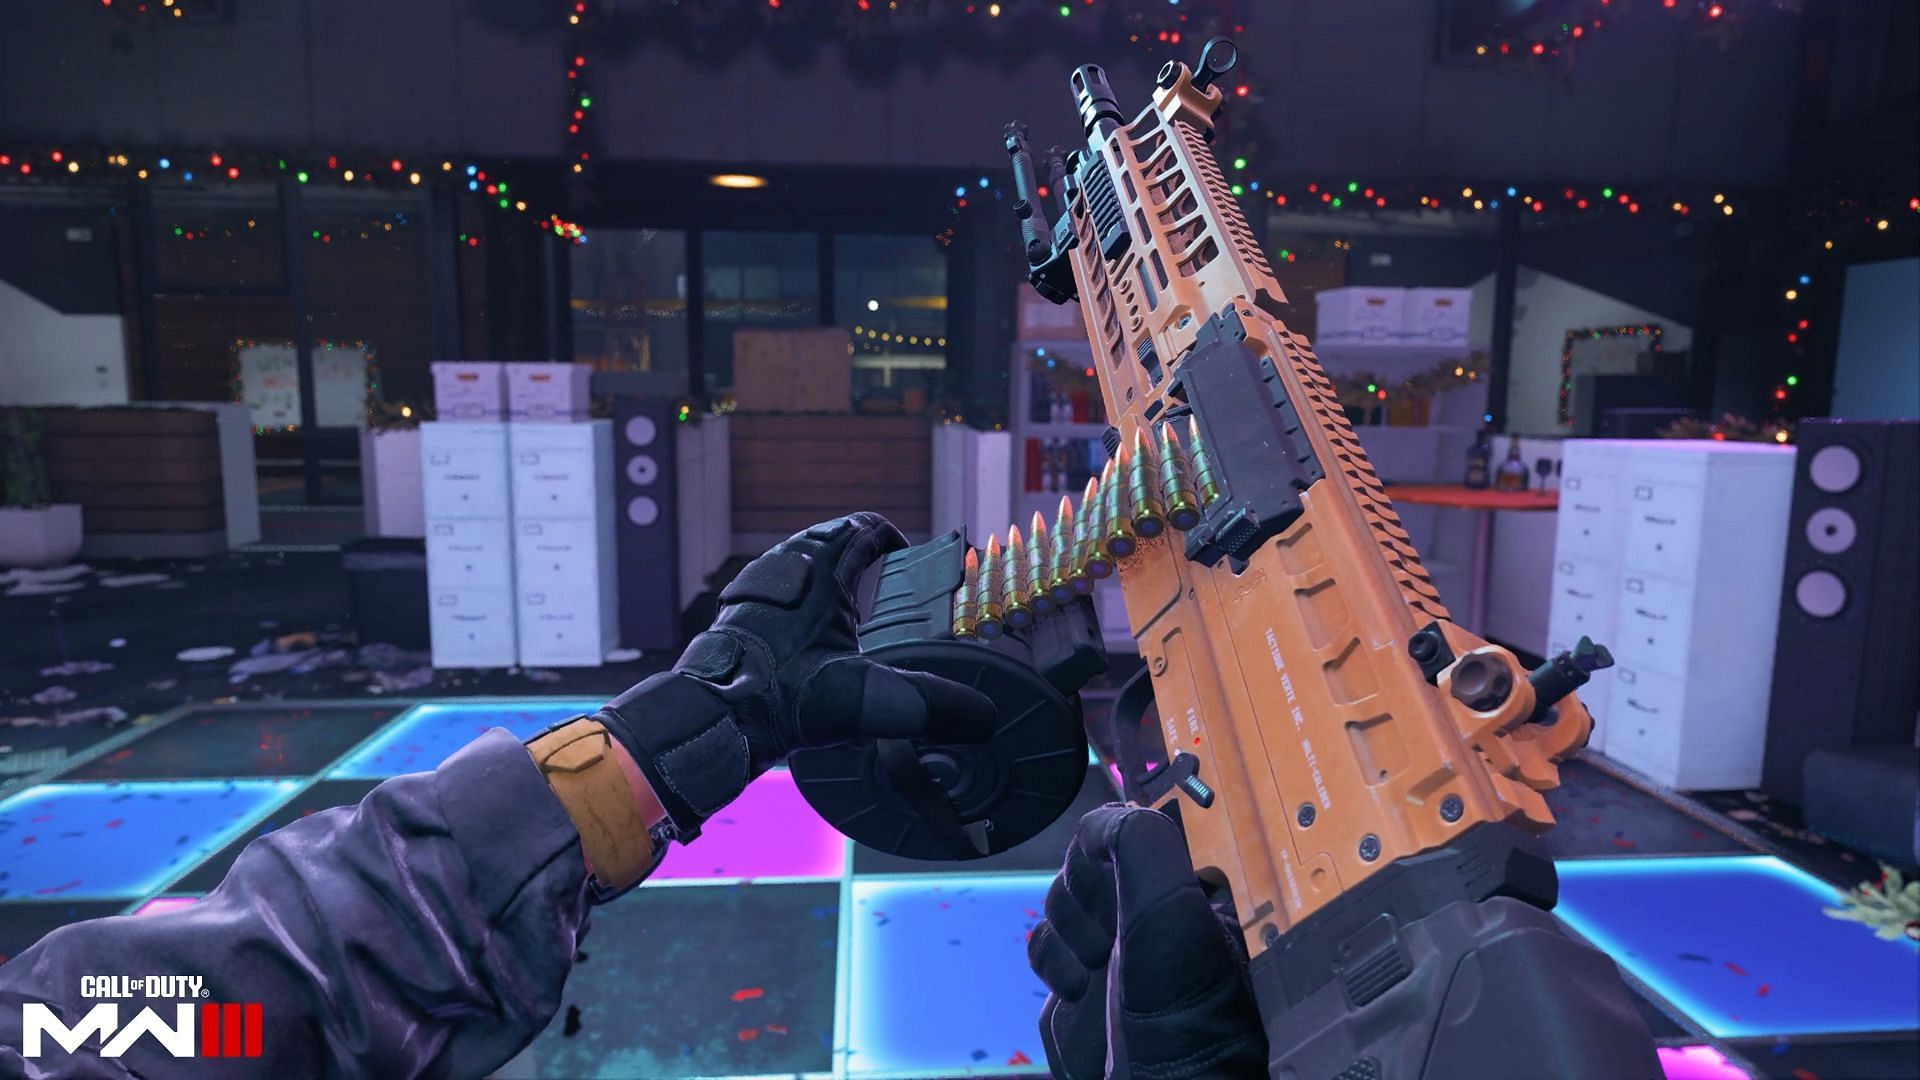 How to play Highrise Christmas version in Modern Warfare 3